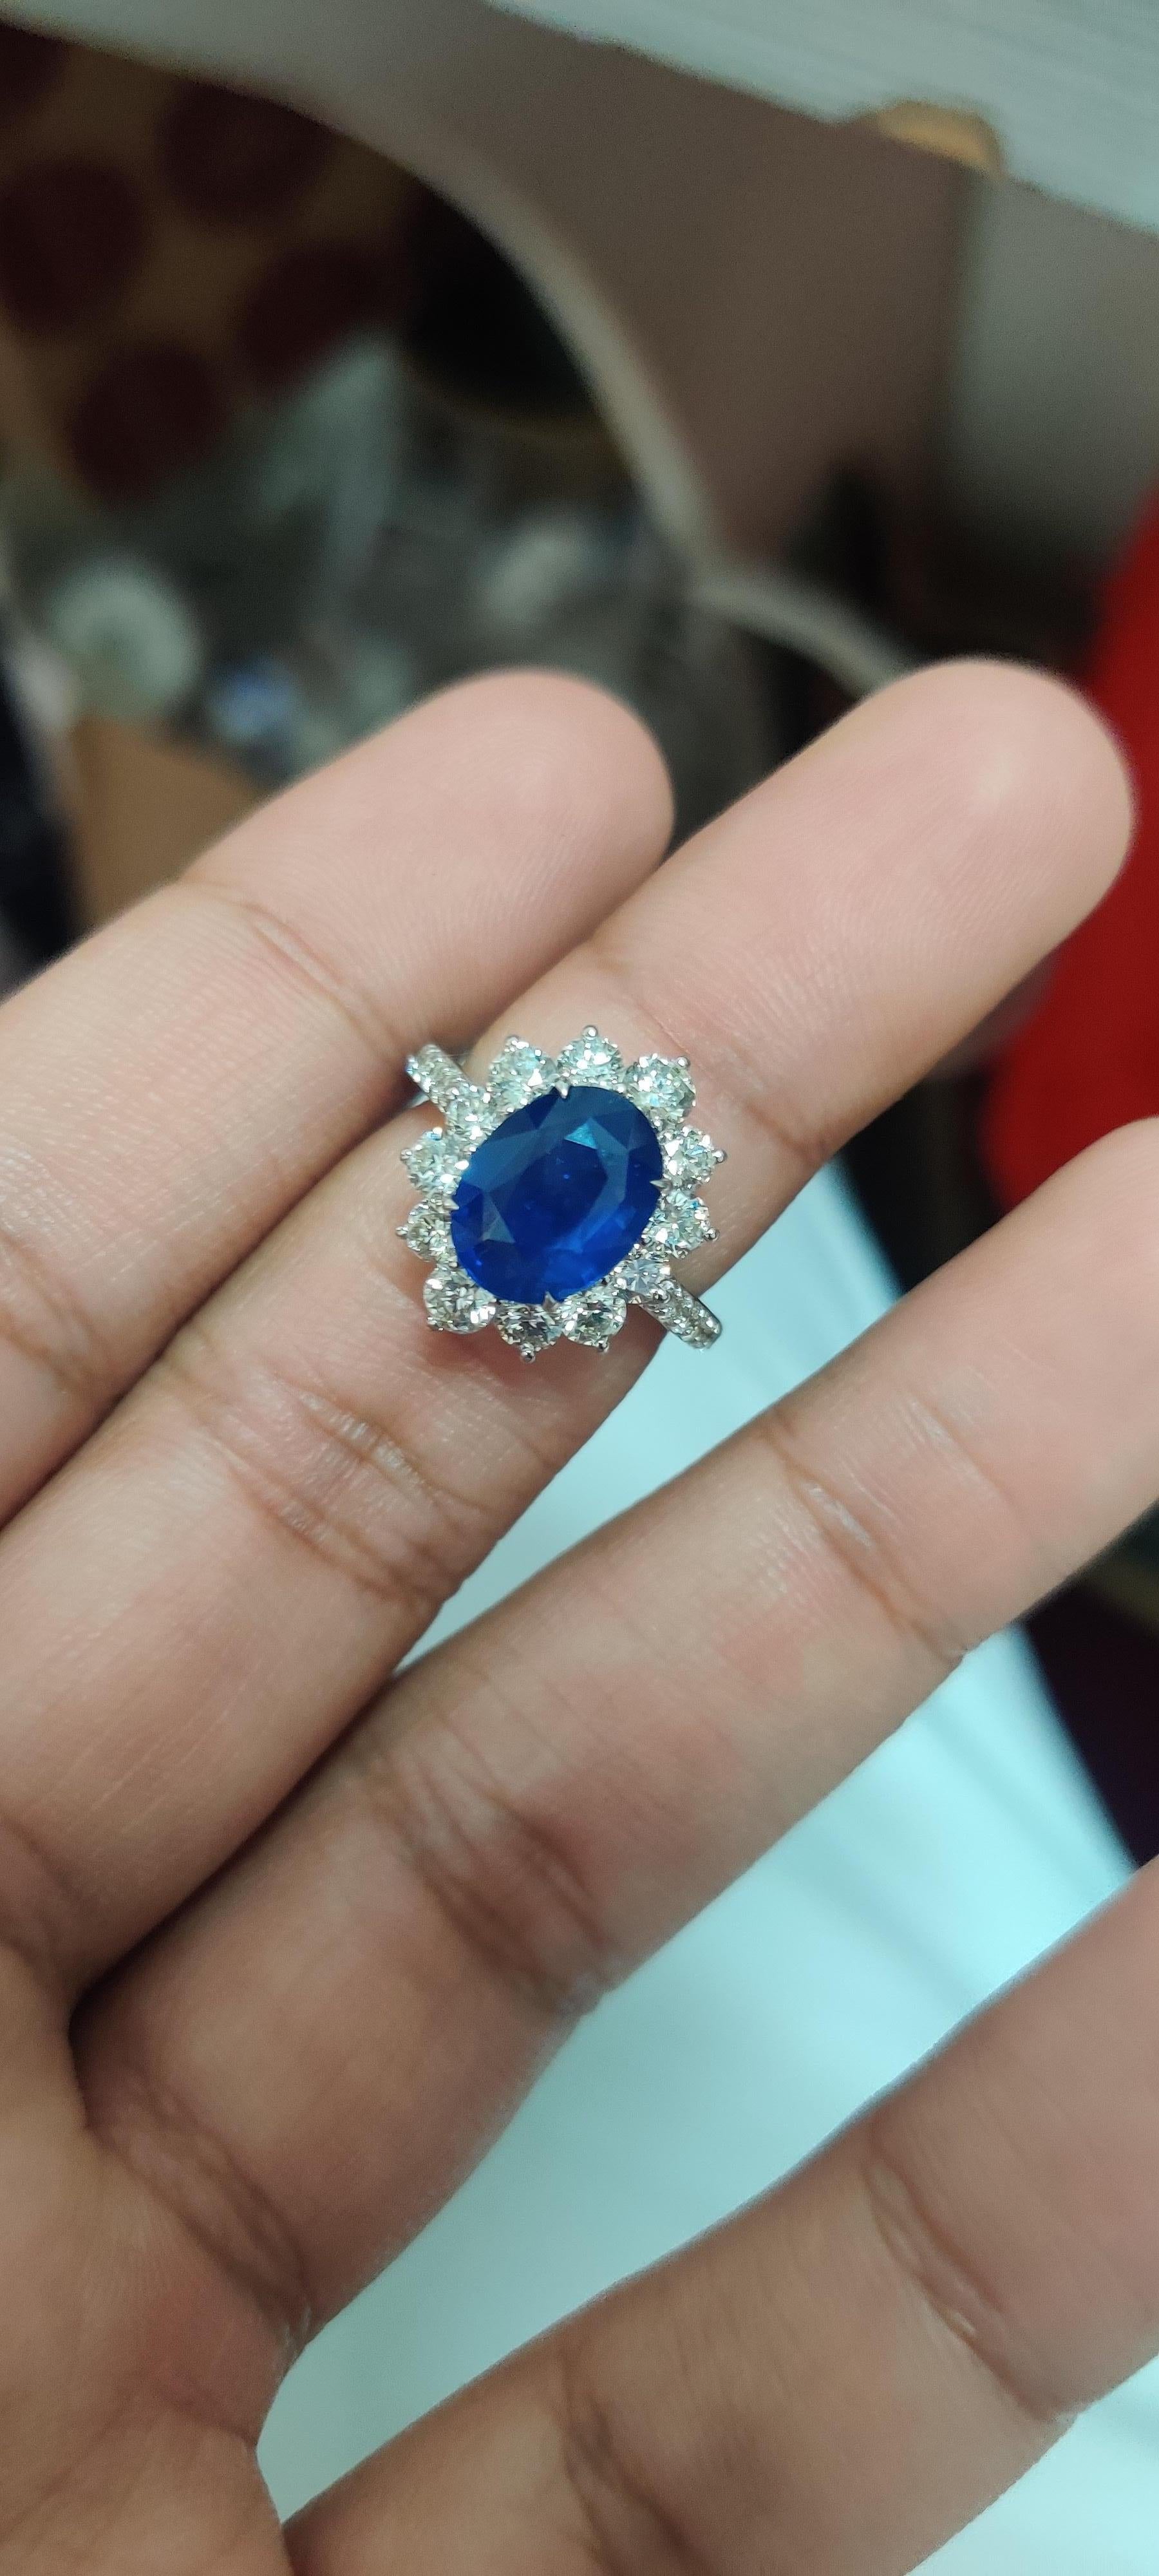 4.19 Carat Sapphire Diamond Cocktail Ring For Sale 2